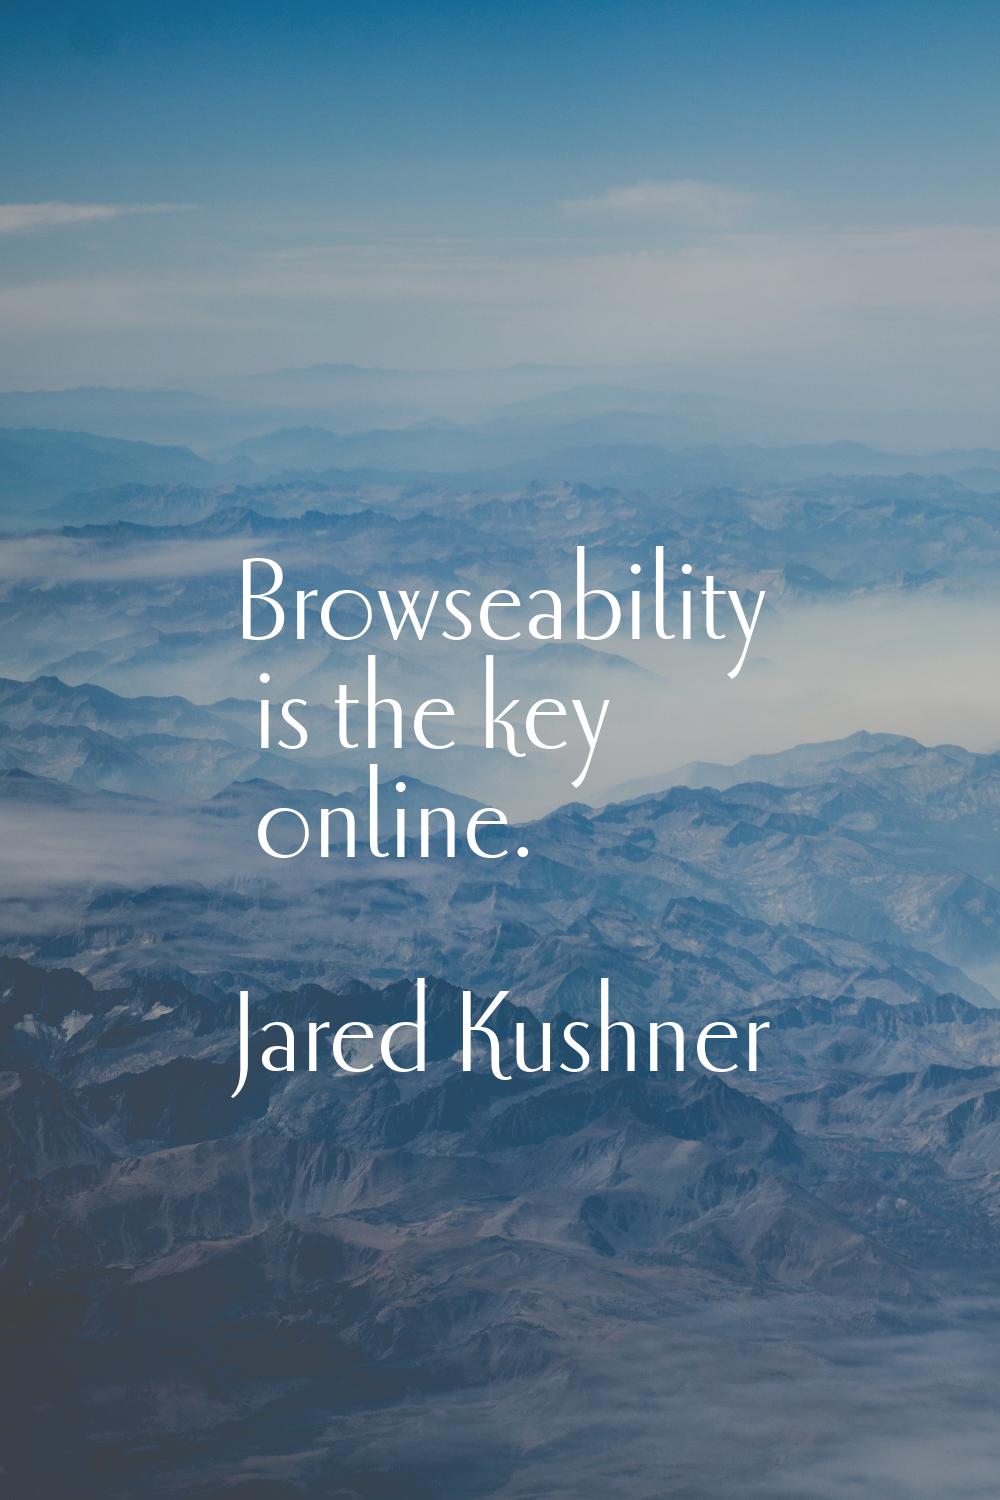 Browseability is the key online.